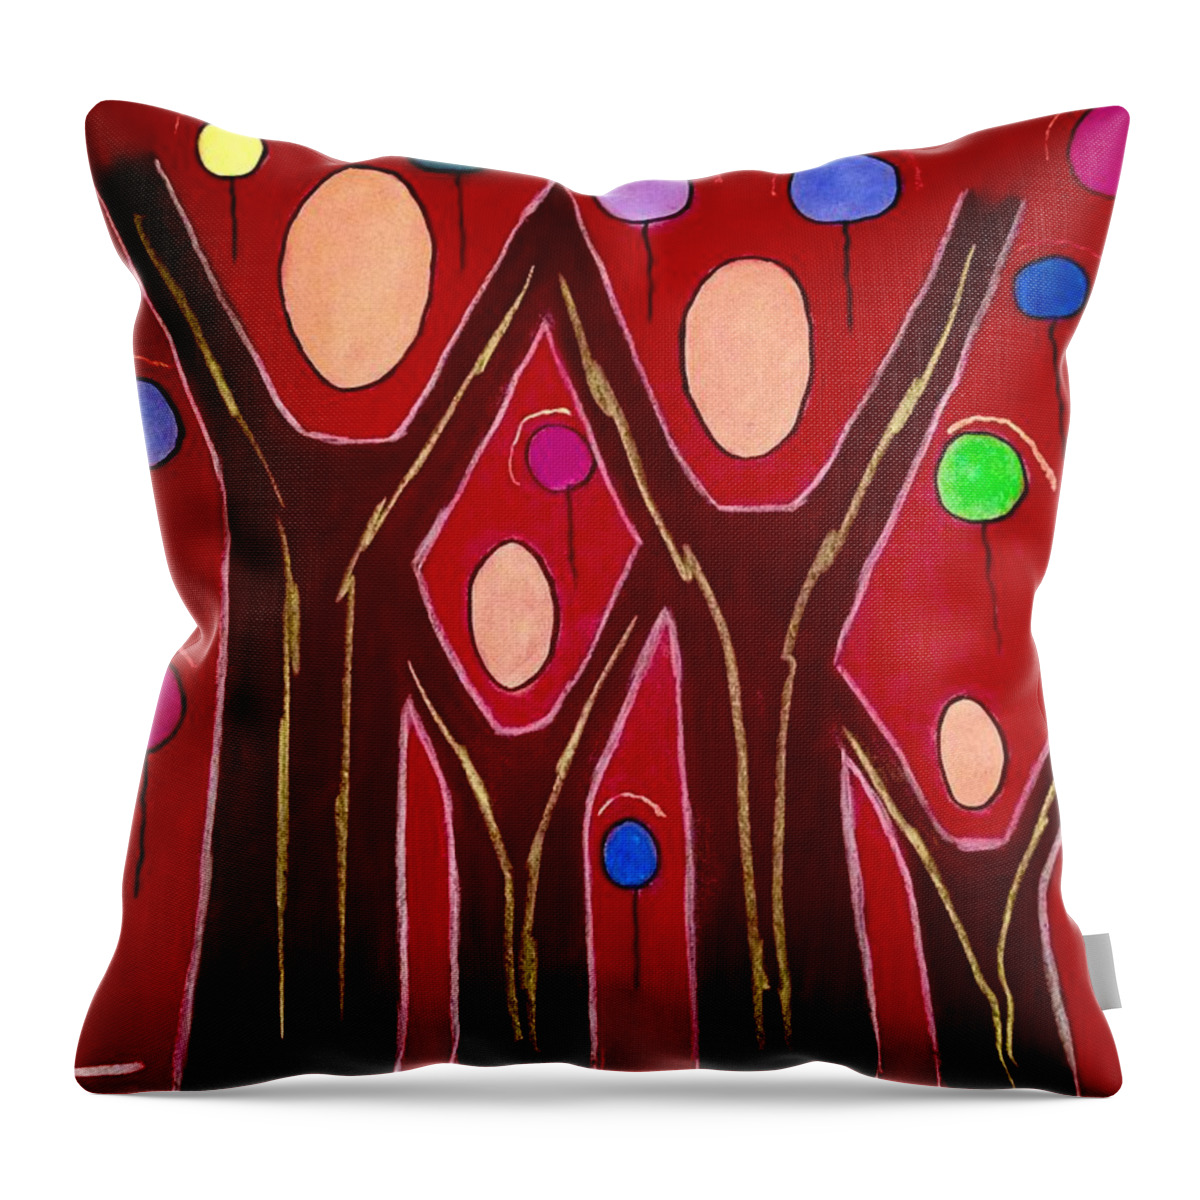 Family Throw Pillow featuring the painting Rejoice As One by Chrissy Pena